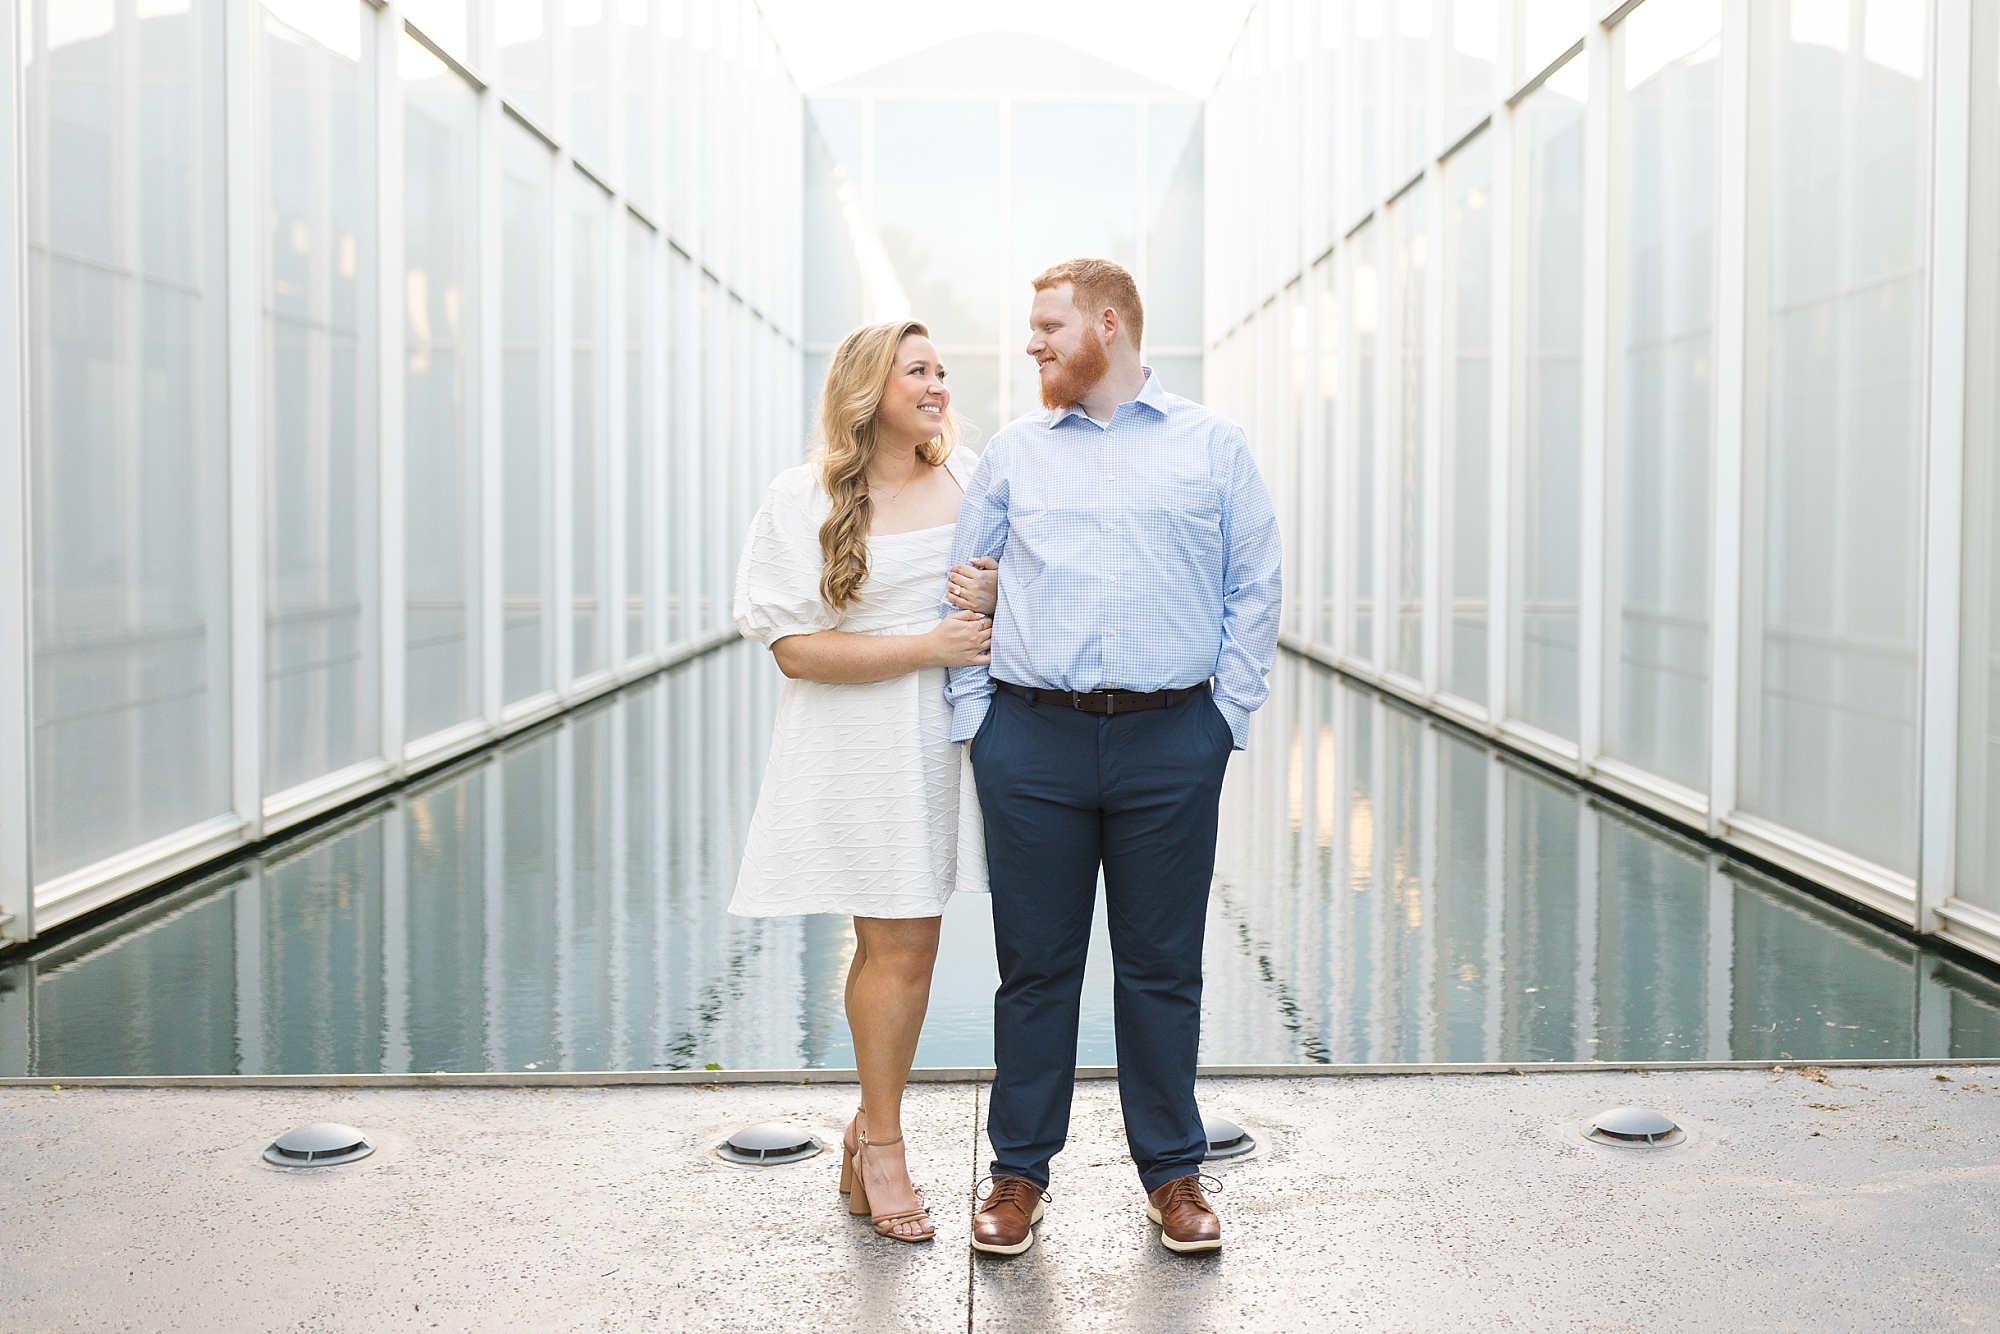 NC Museum of Art Reflecting Pool | Raleigh NC Engagement Photographer